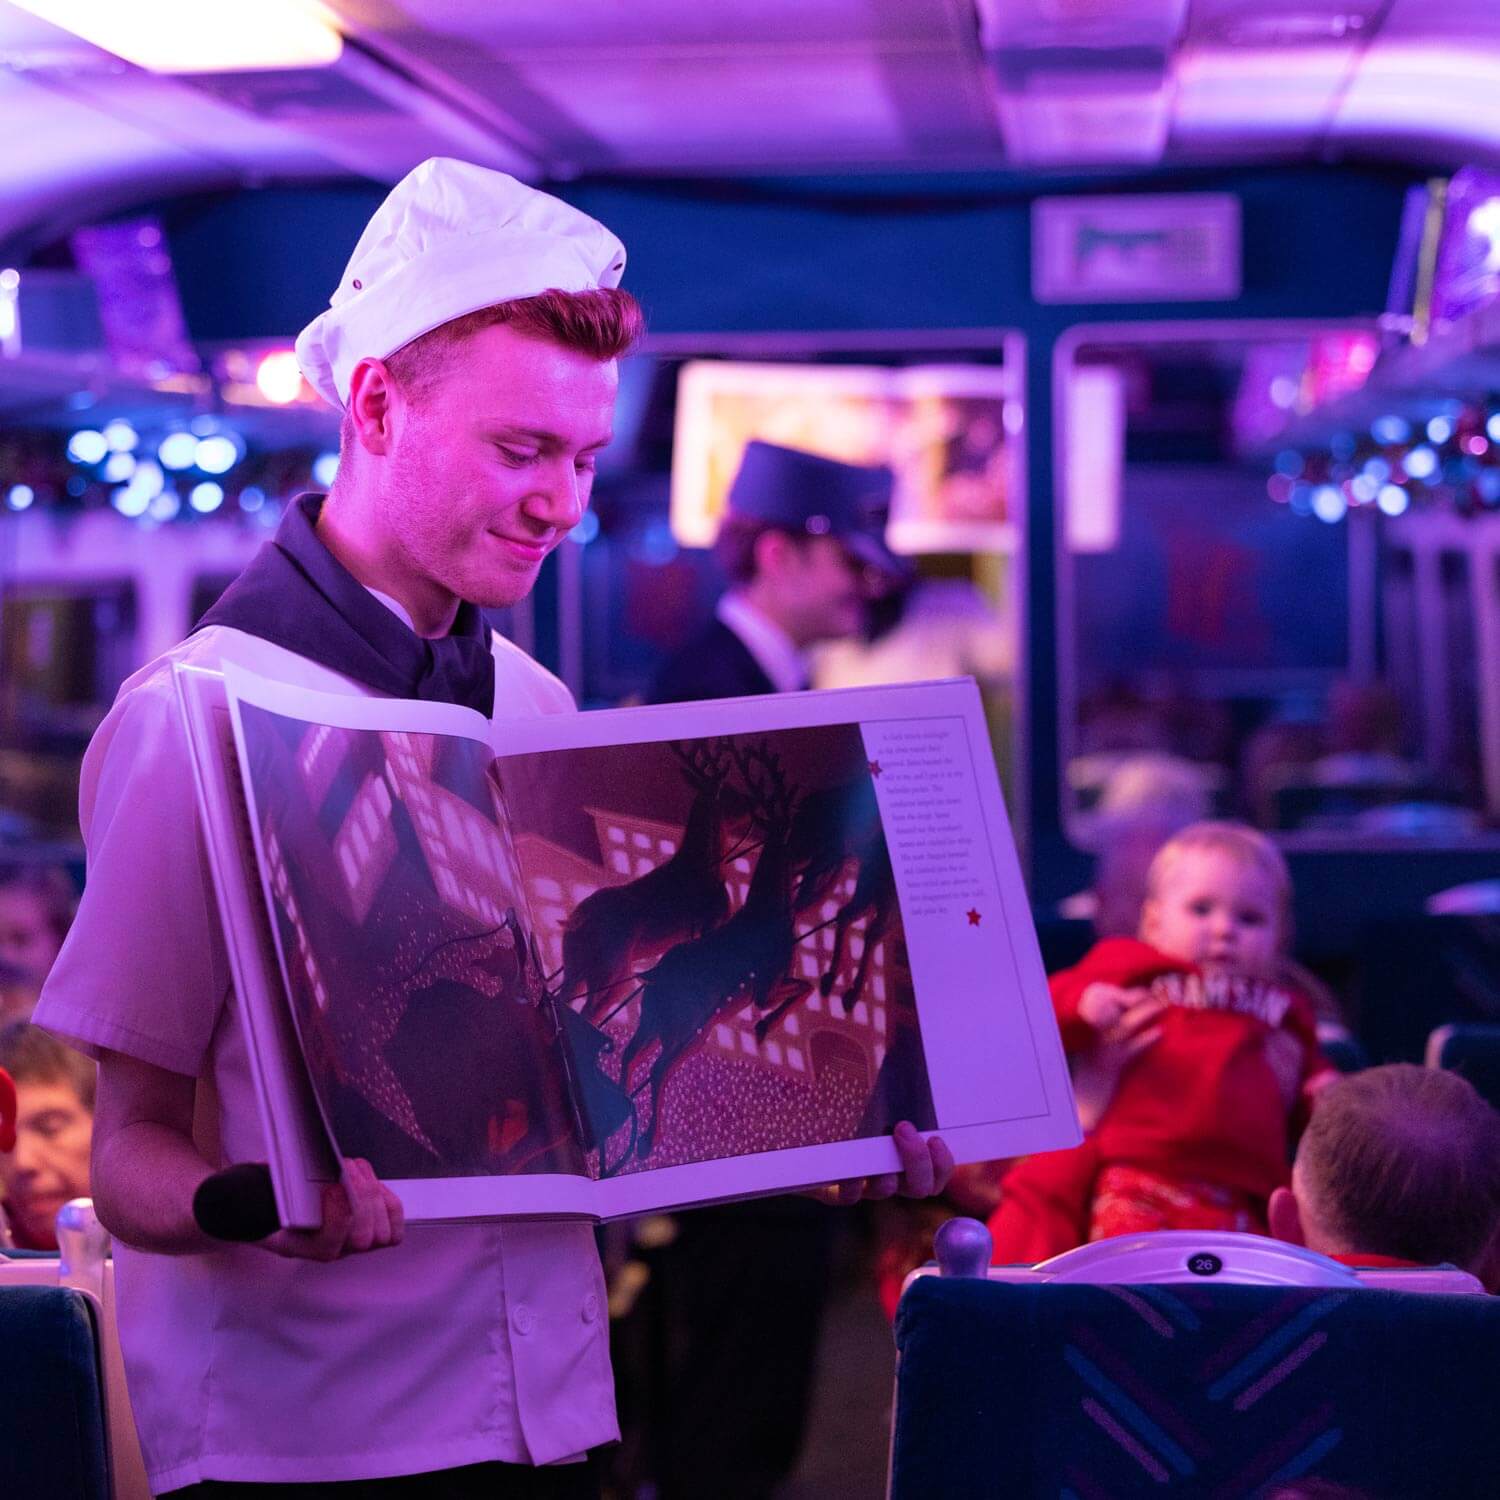 The conductor clipping tickets on THE POLAR EXPRESS™ Train Ride London